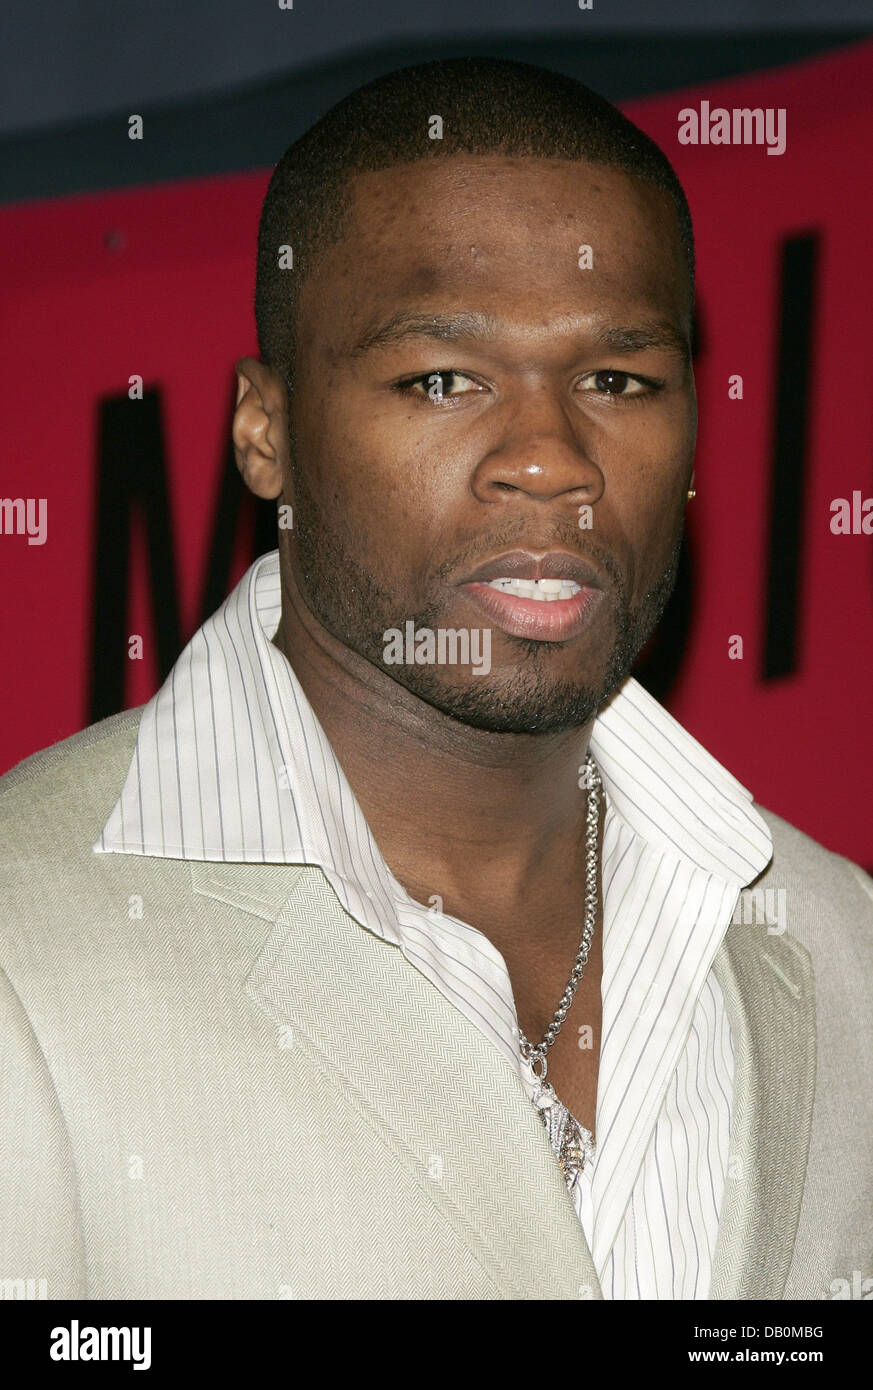 The picture shows rapper 50 cent at the 2007 MTV Video Music Awards ...